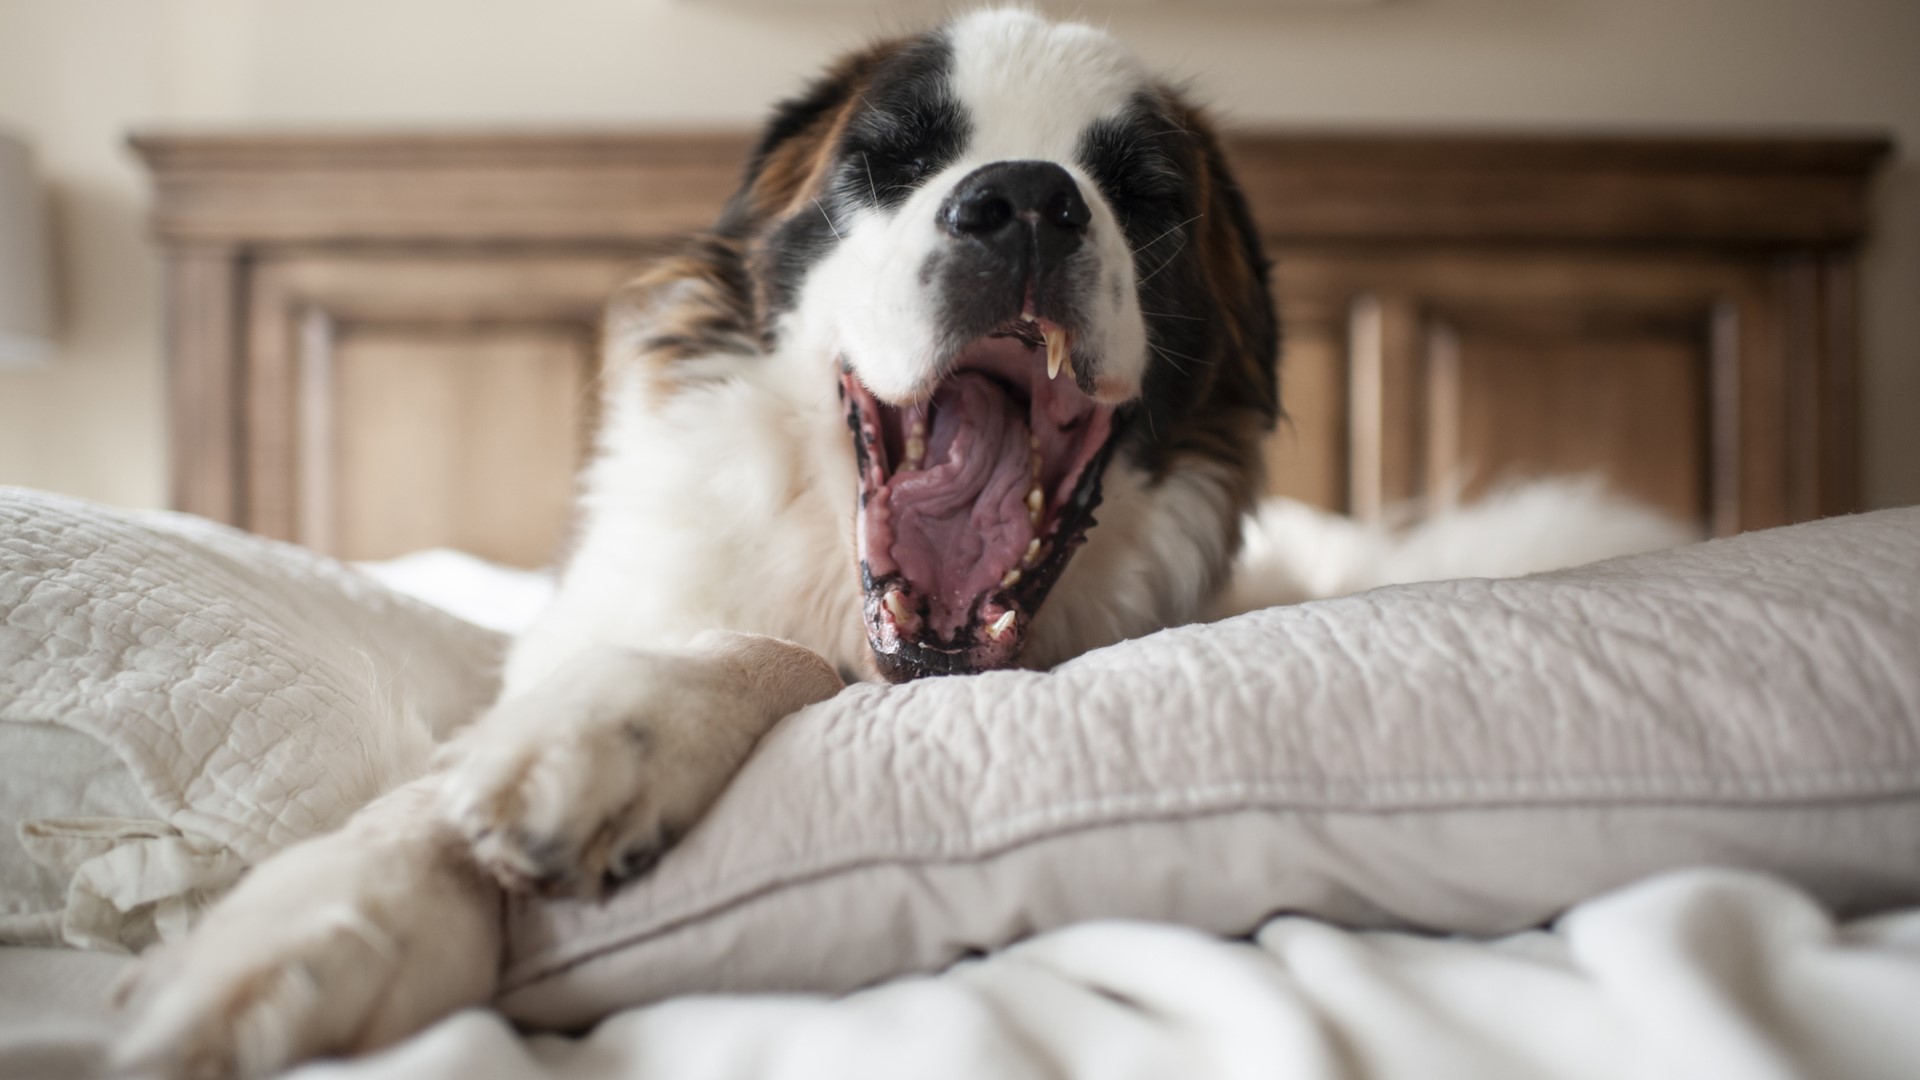 A Saint Bernard barking while laying on a bed